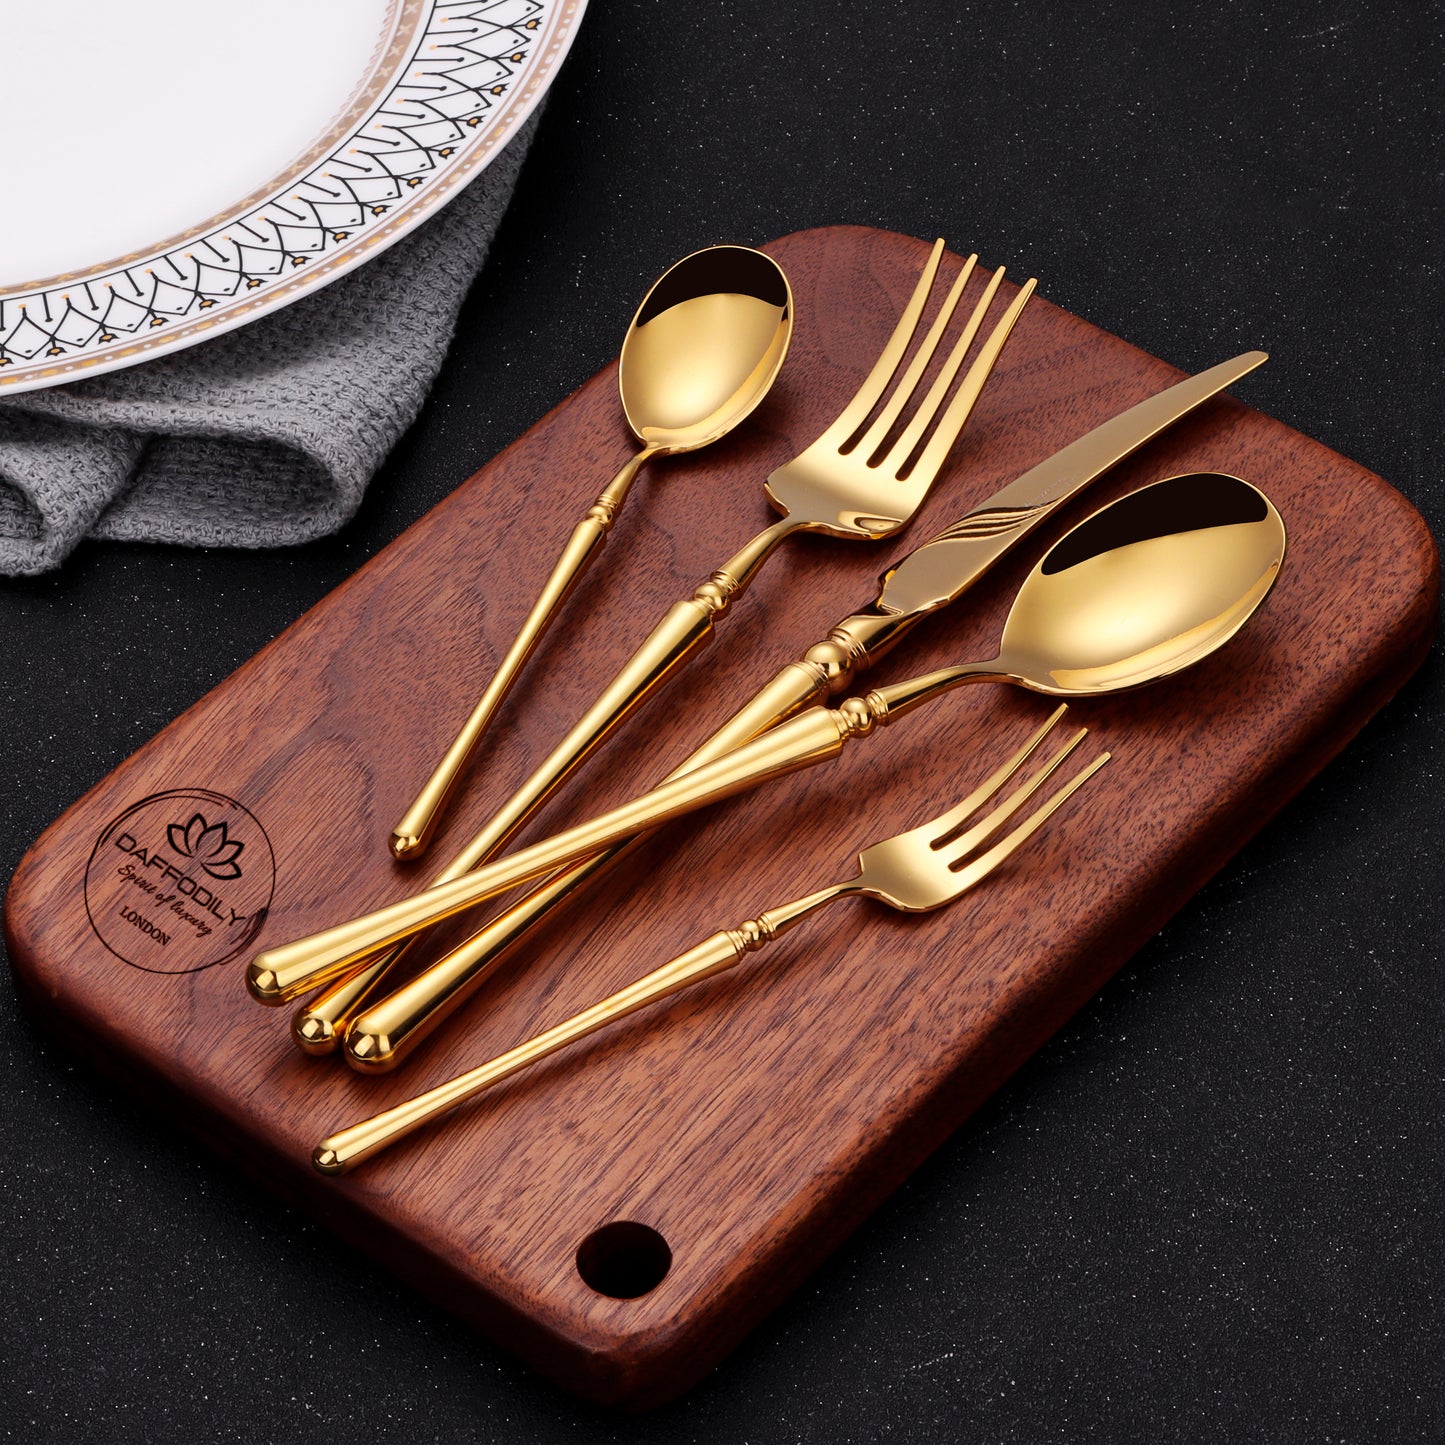 Enhance your dining collection with the TALIN Luxury Cutlery Set from Daffodily